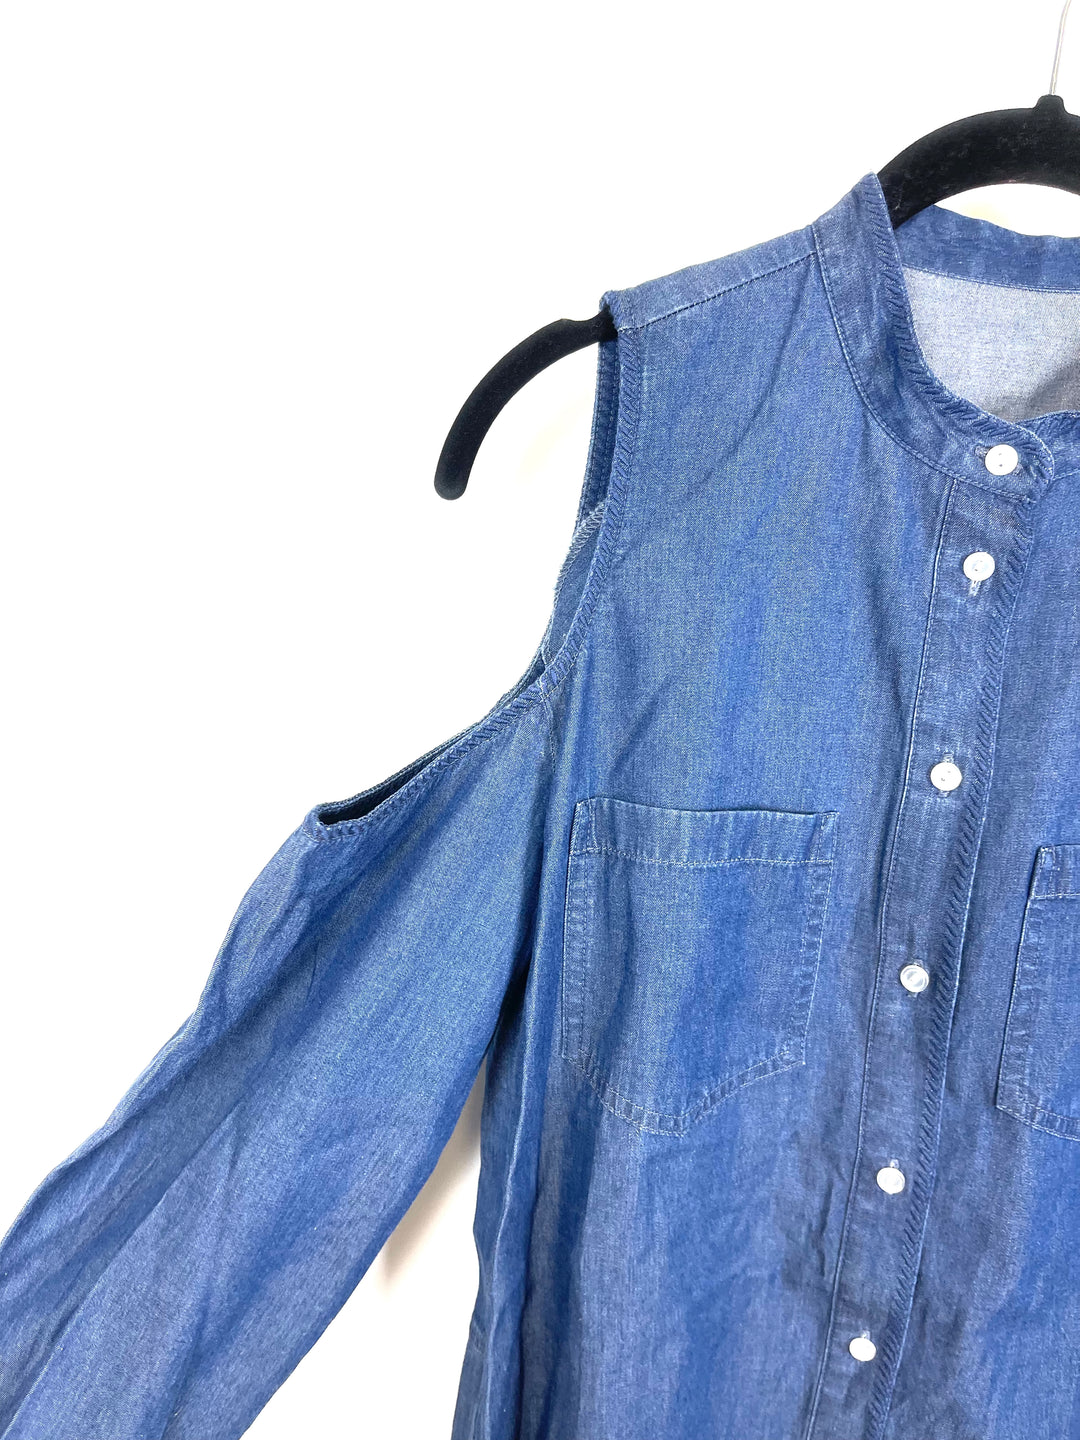 Denim Long Sleeve Button Down Top with Shoulder Cutouts - Small